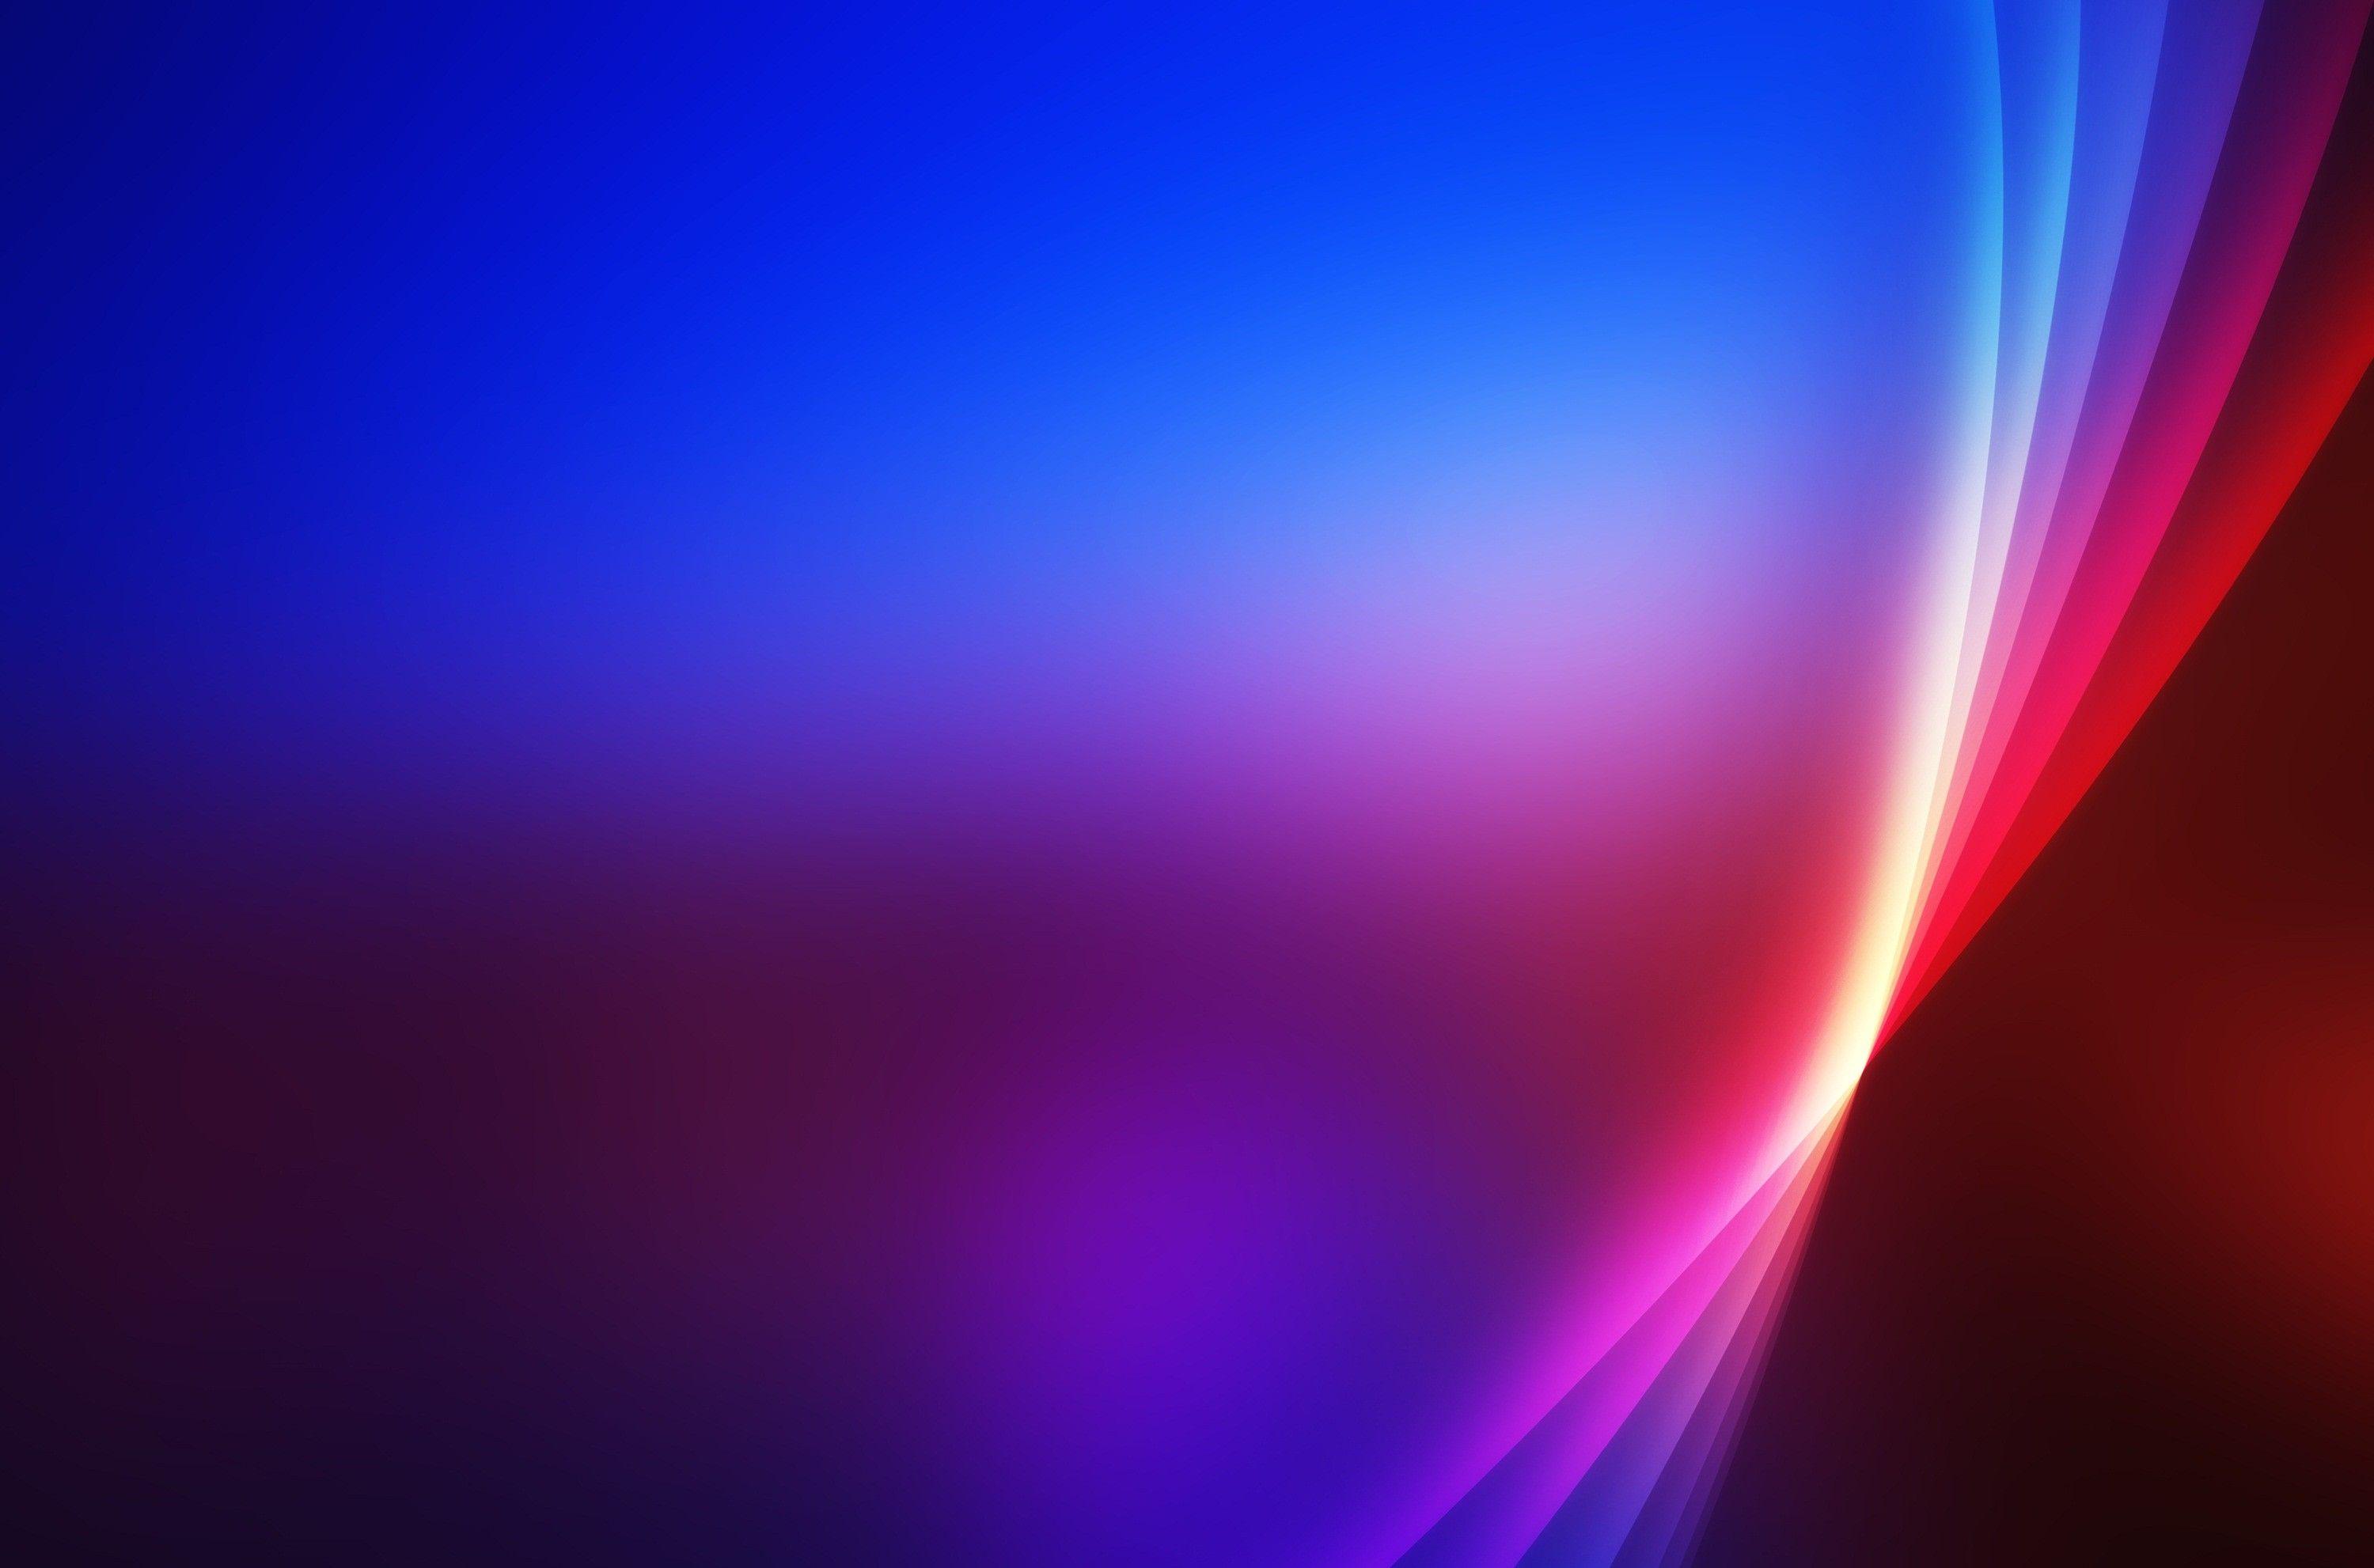 Simple HD Wallpapers on WallpaperDog